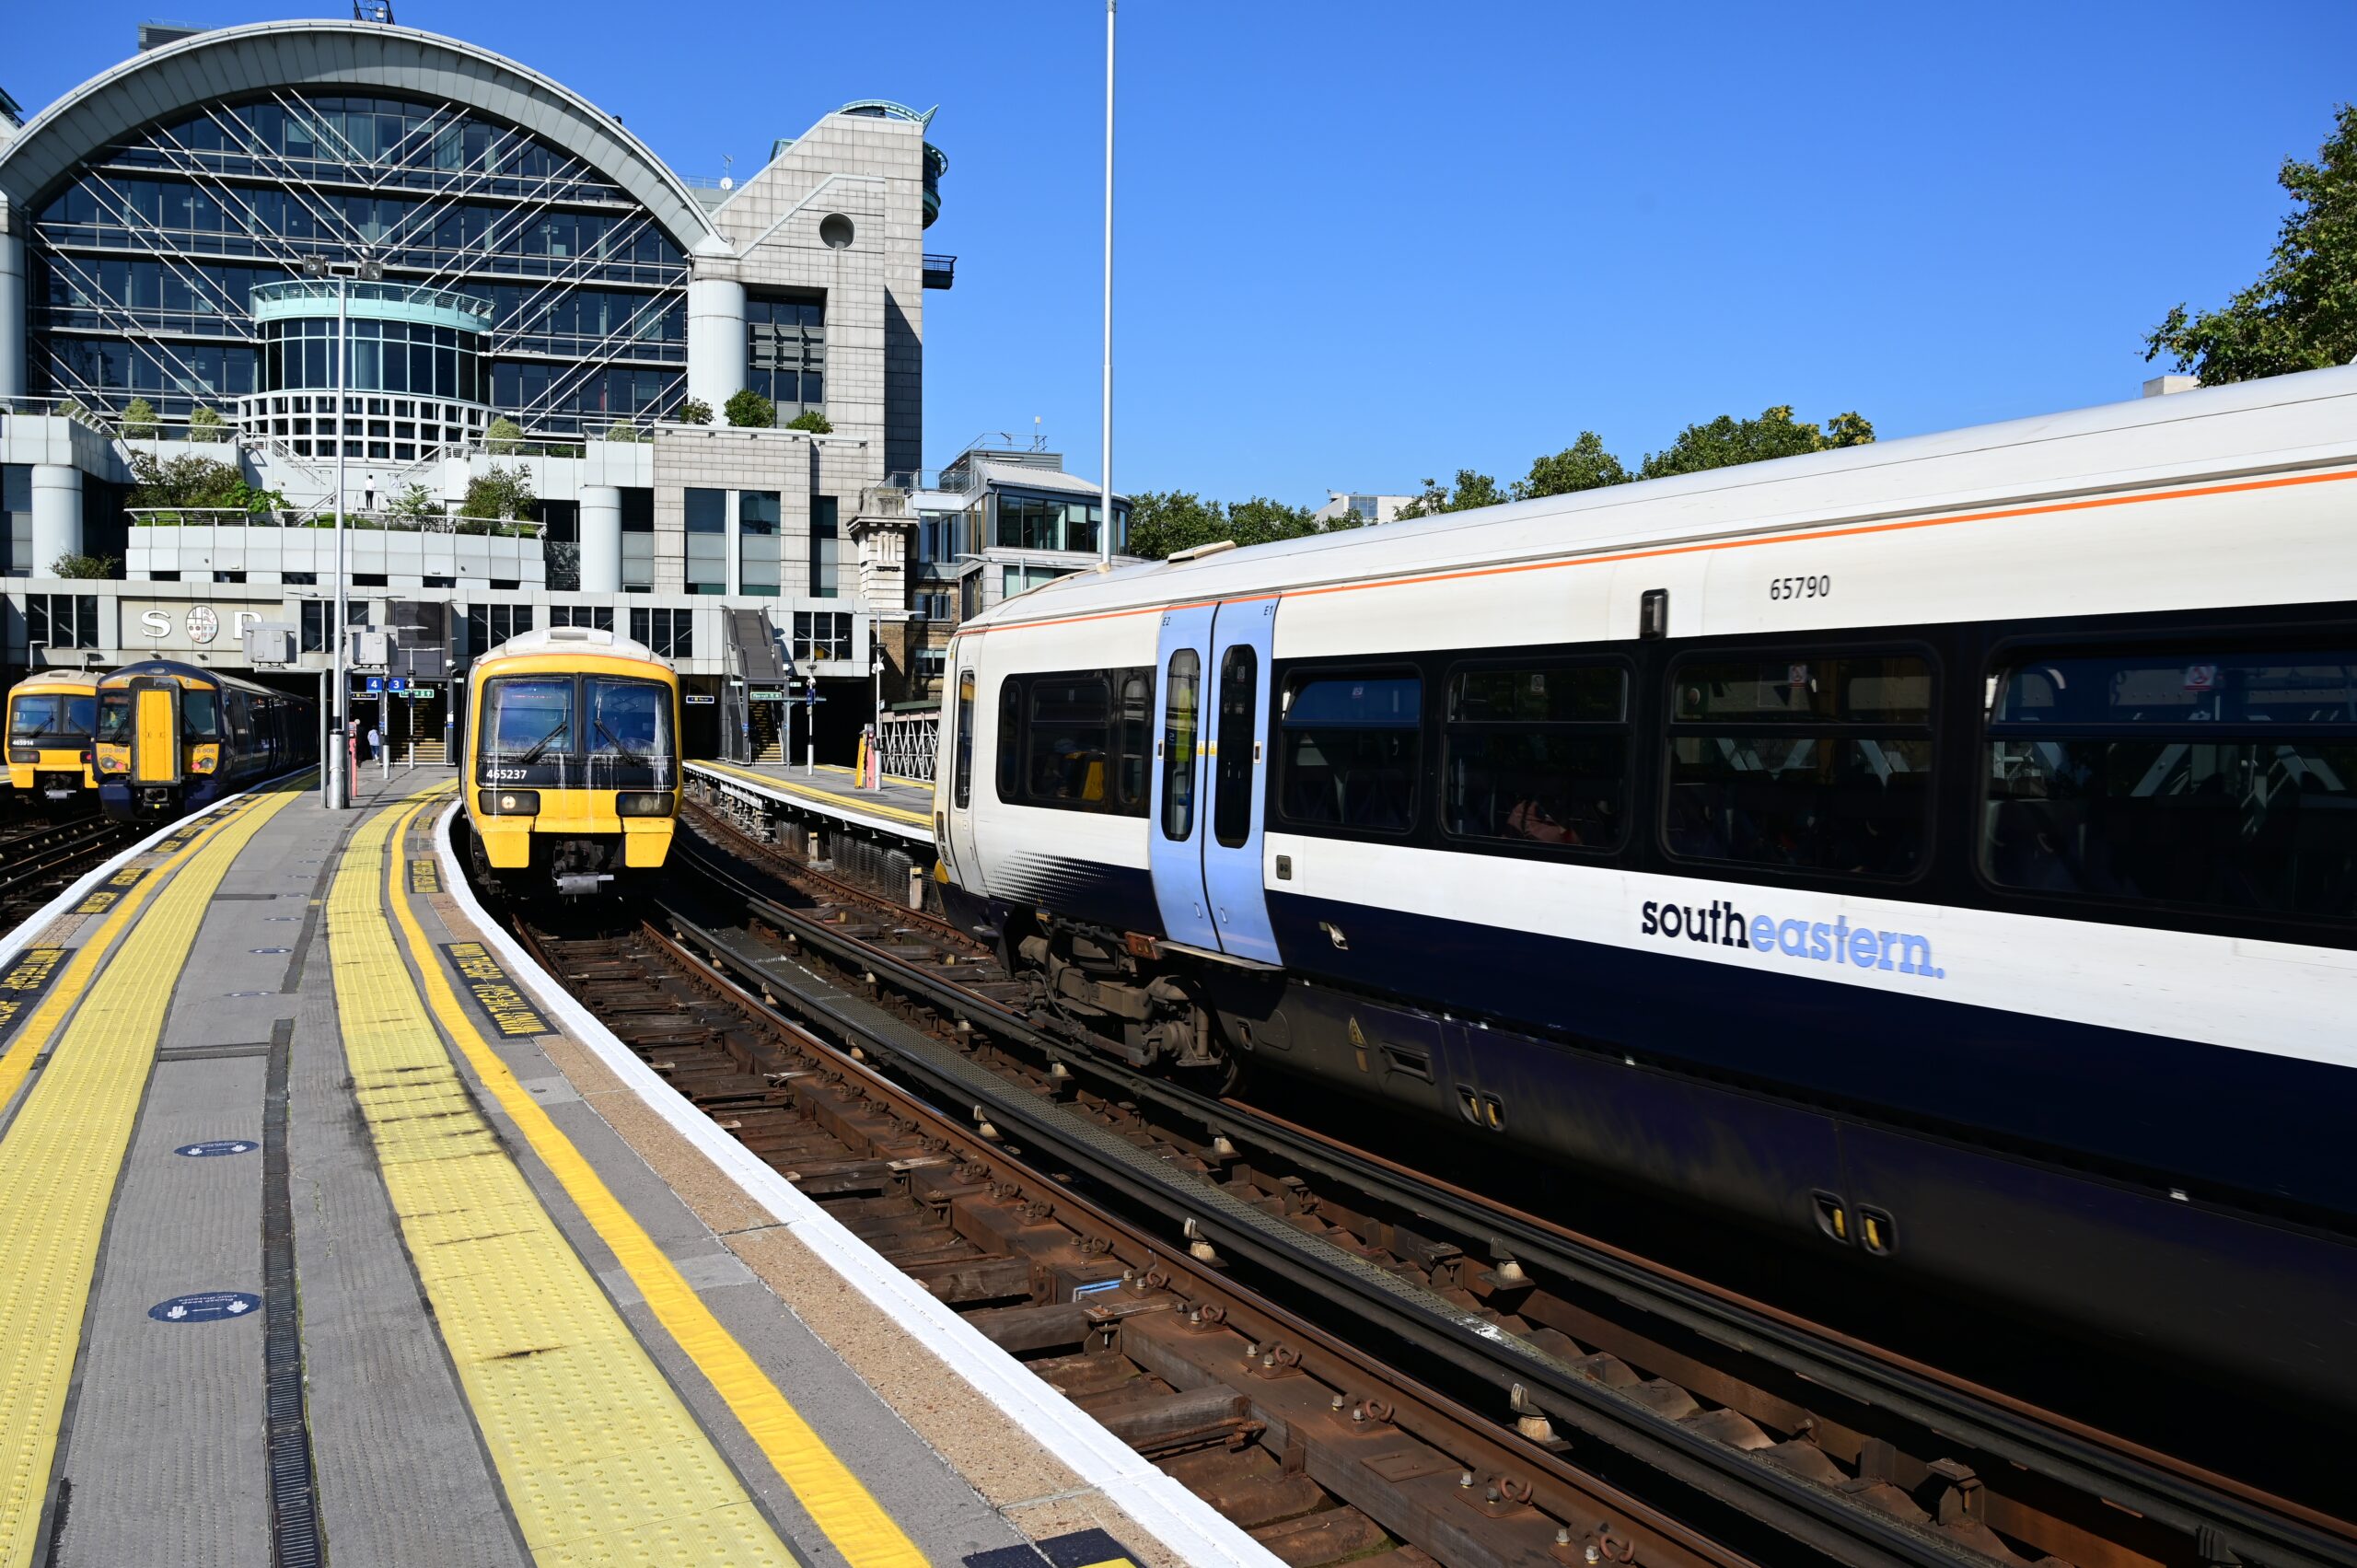 Southeastern trains at Charing Cross